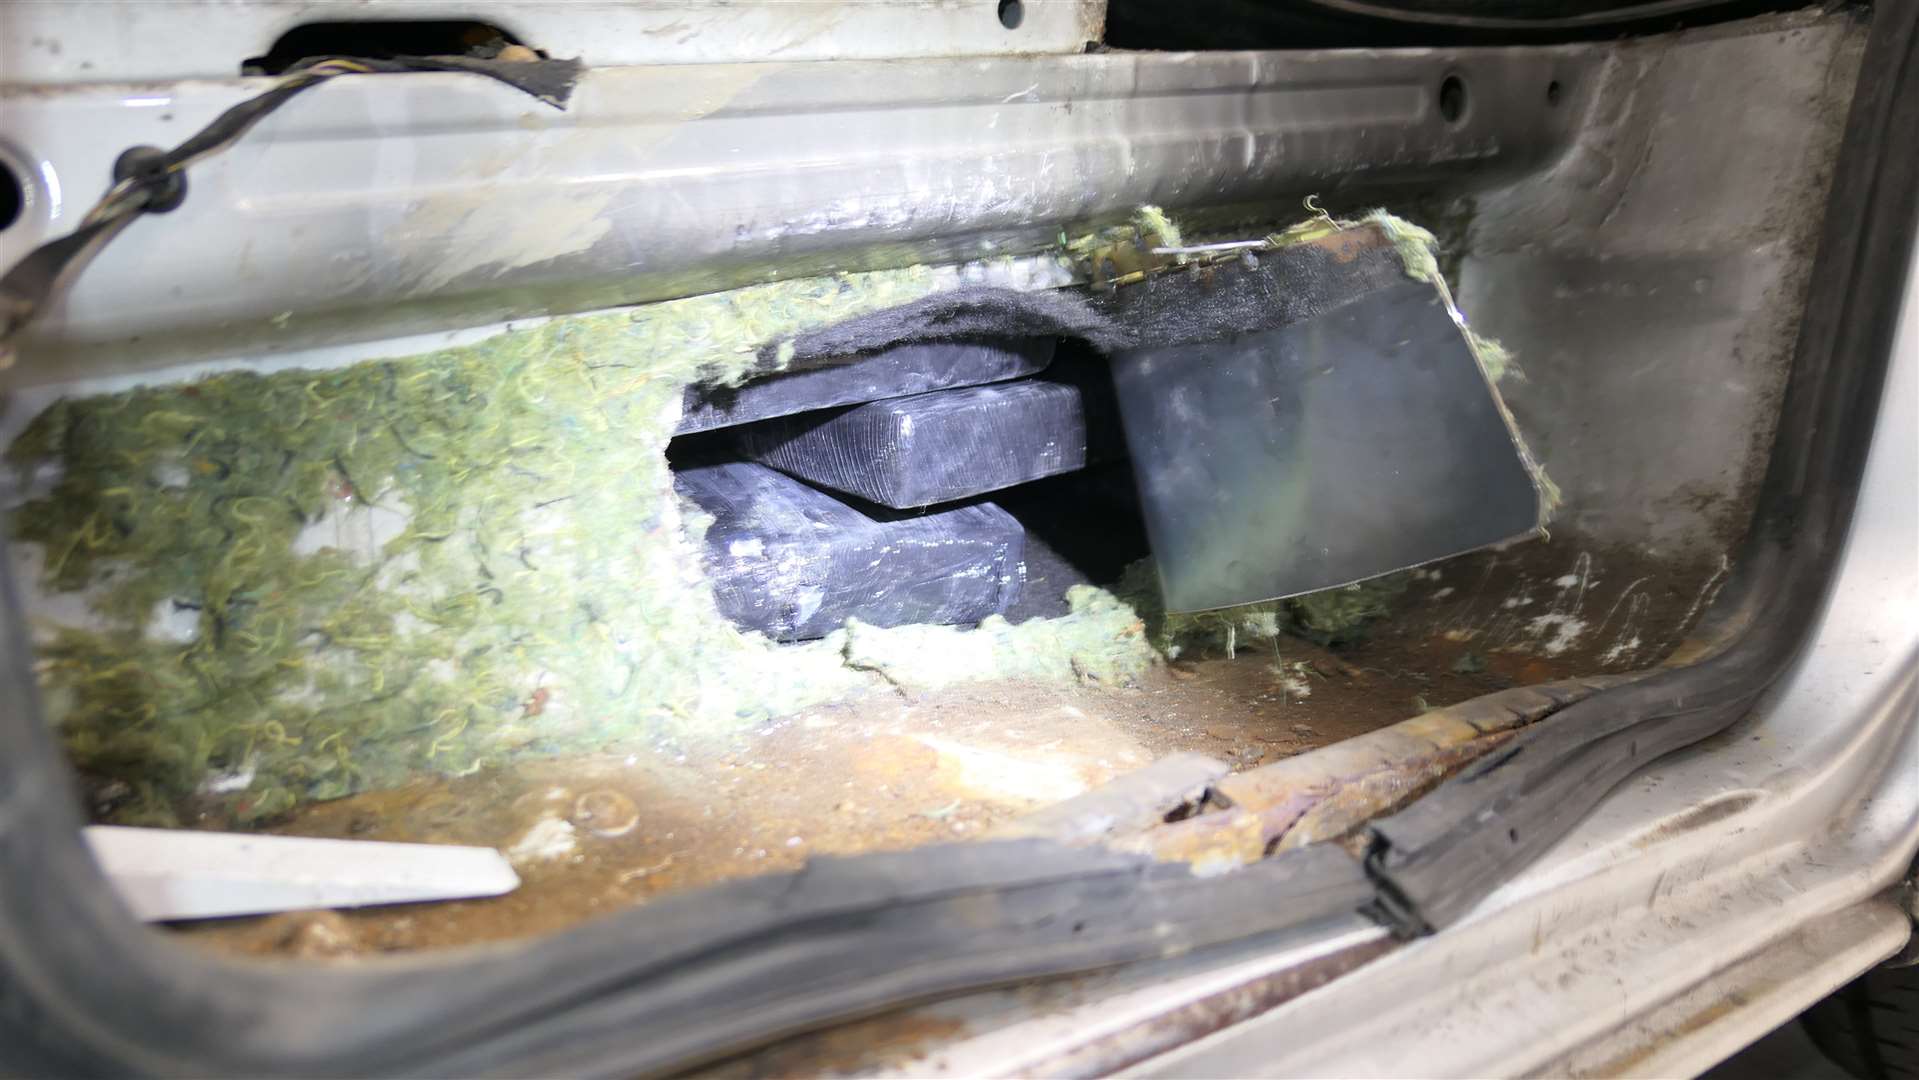 The 15 kilos of cocaine were hidden behind the doorstep underneath the driver and passenger seats Picture: NCA